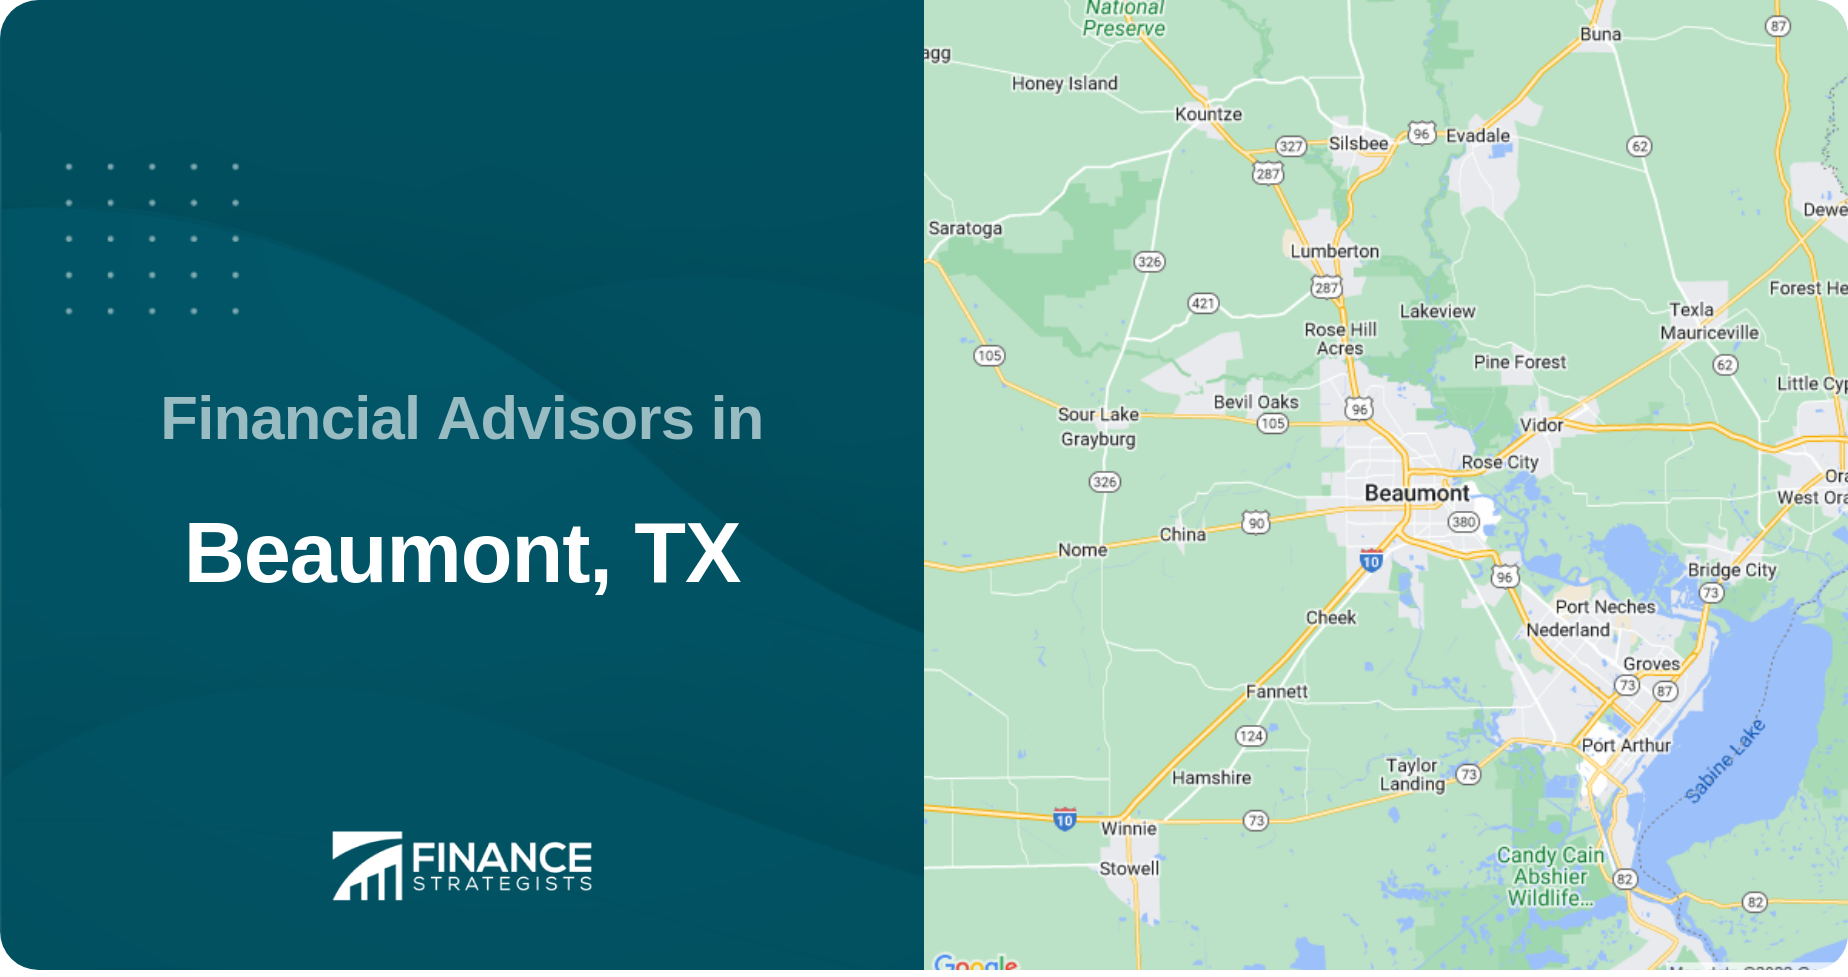 Financial Advisors in Beaumont, TX